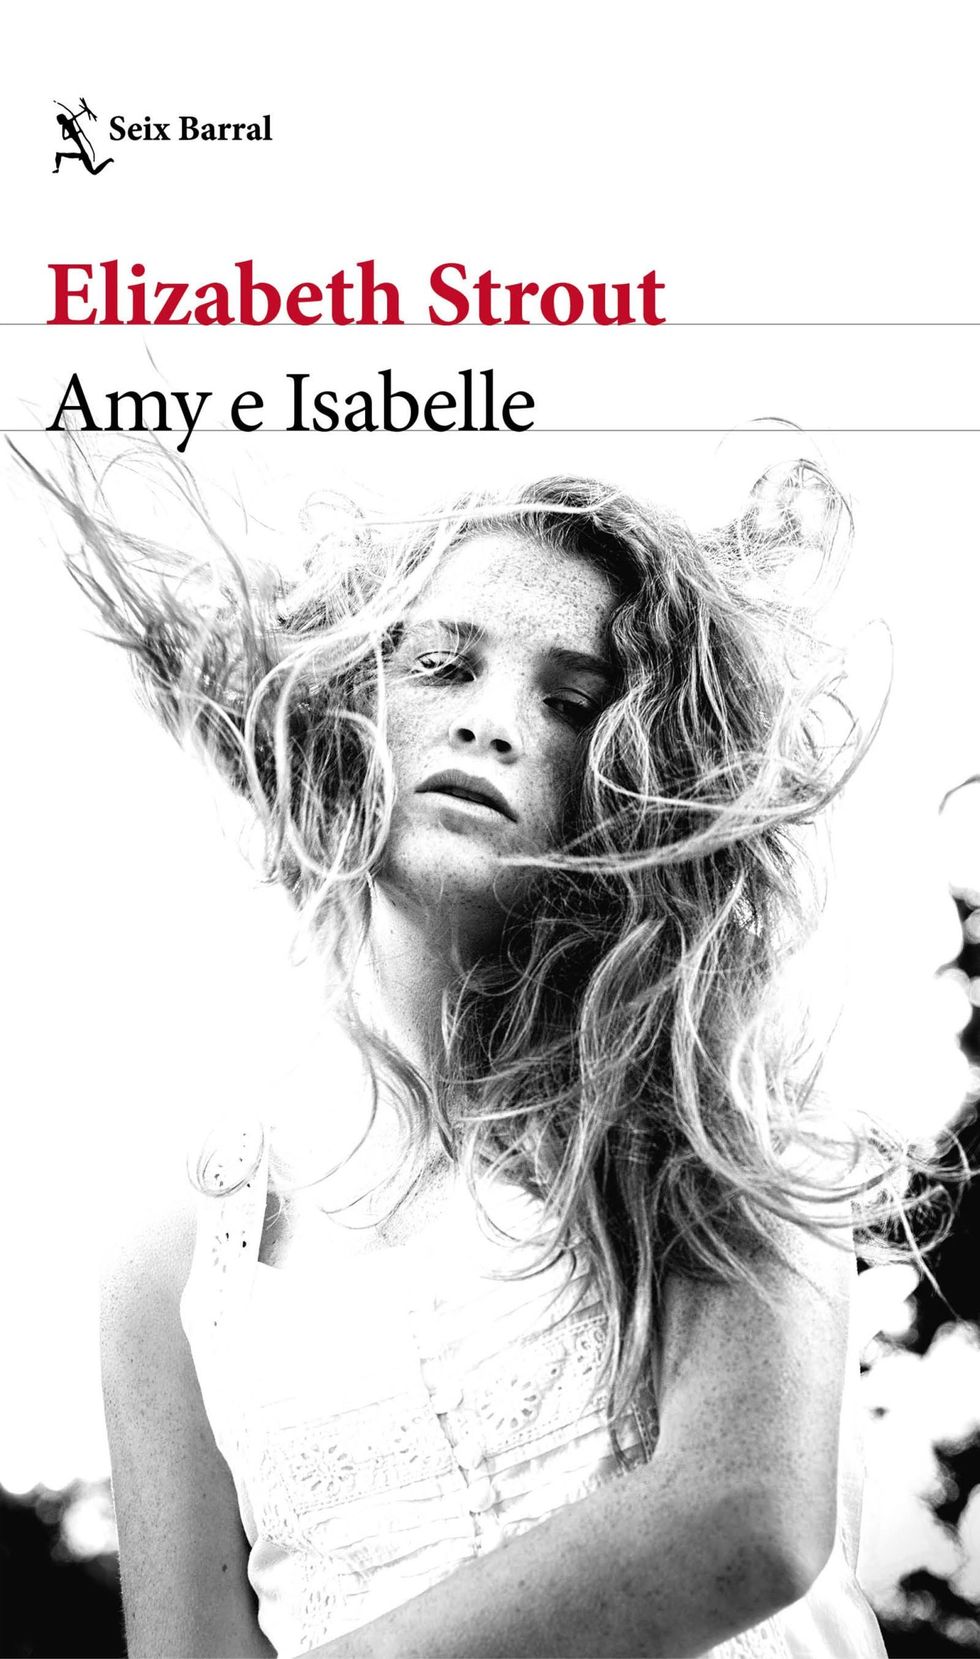 Hair, Beauty, Black-and-white, Text, Hairstyle, Monochrome, Photography, Long hair, Album cover, Font, 